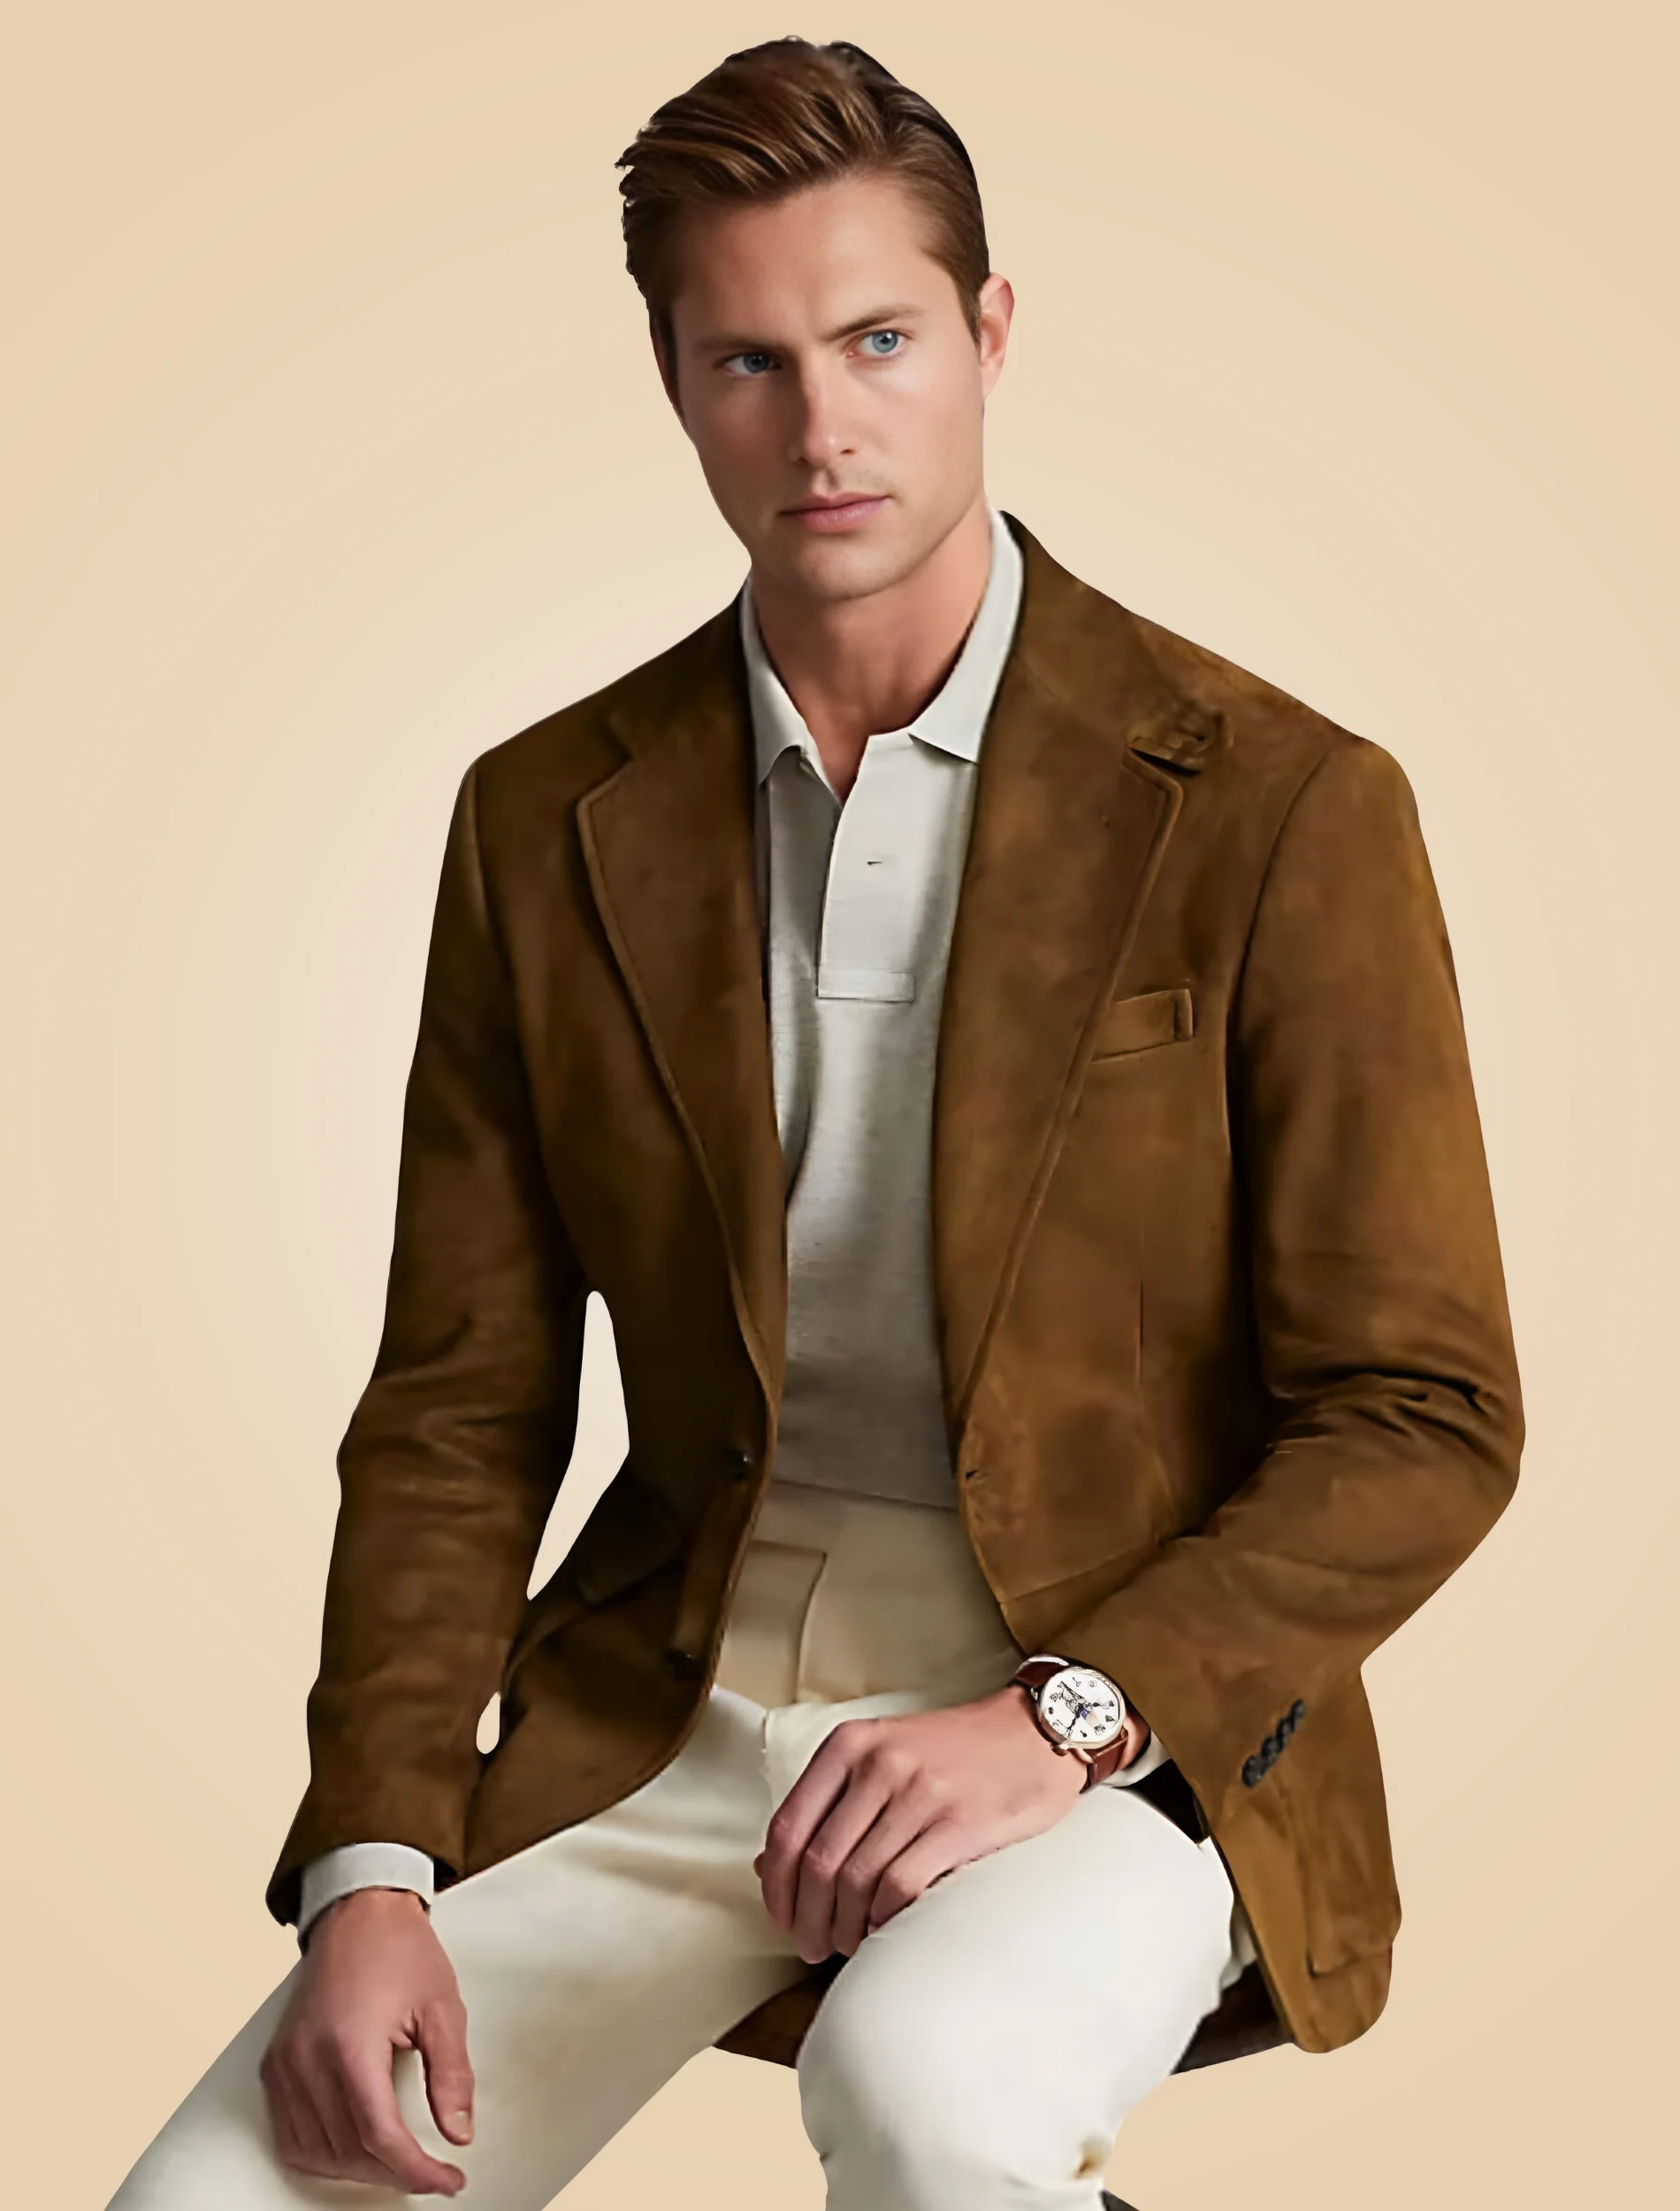 Mens Classic Brown Suede Leather Blazer